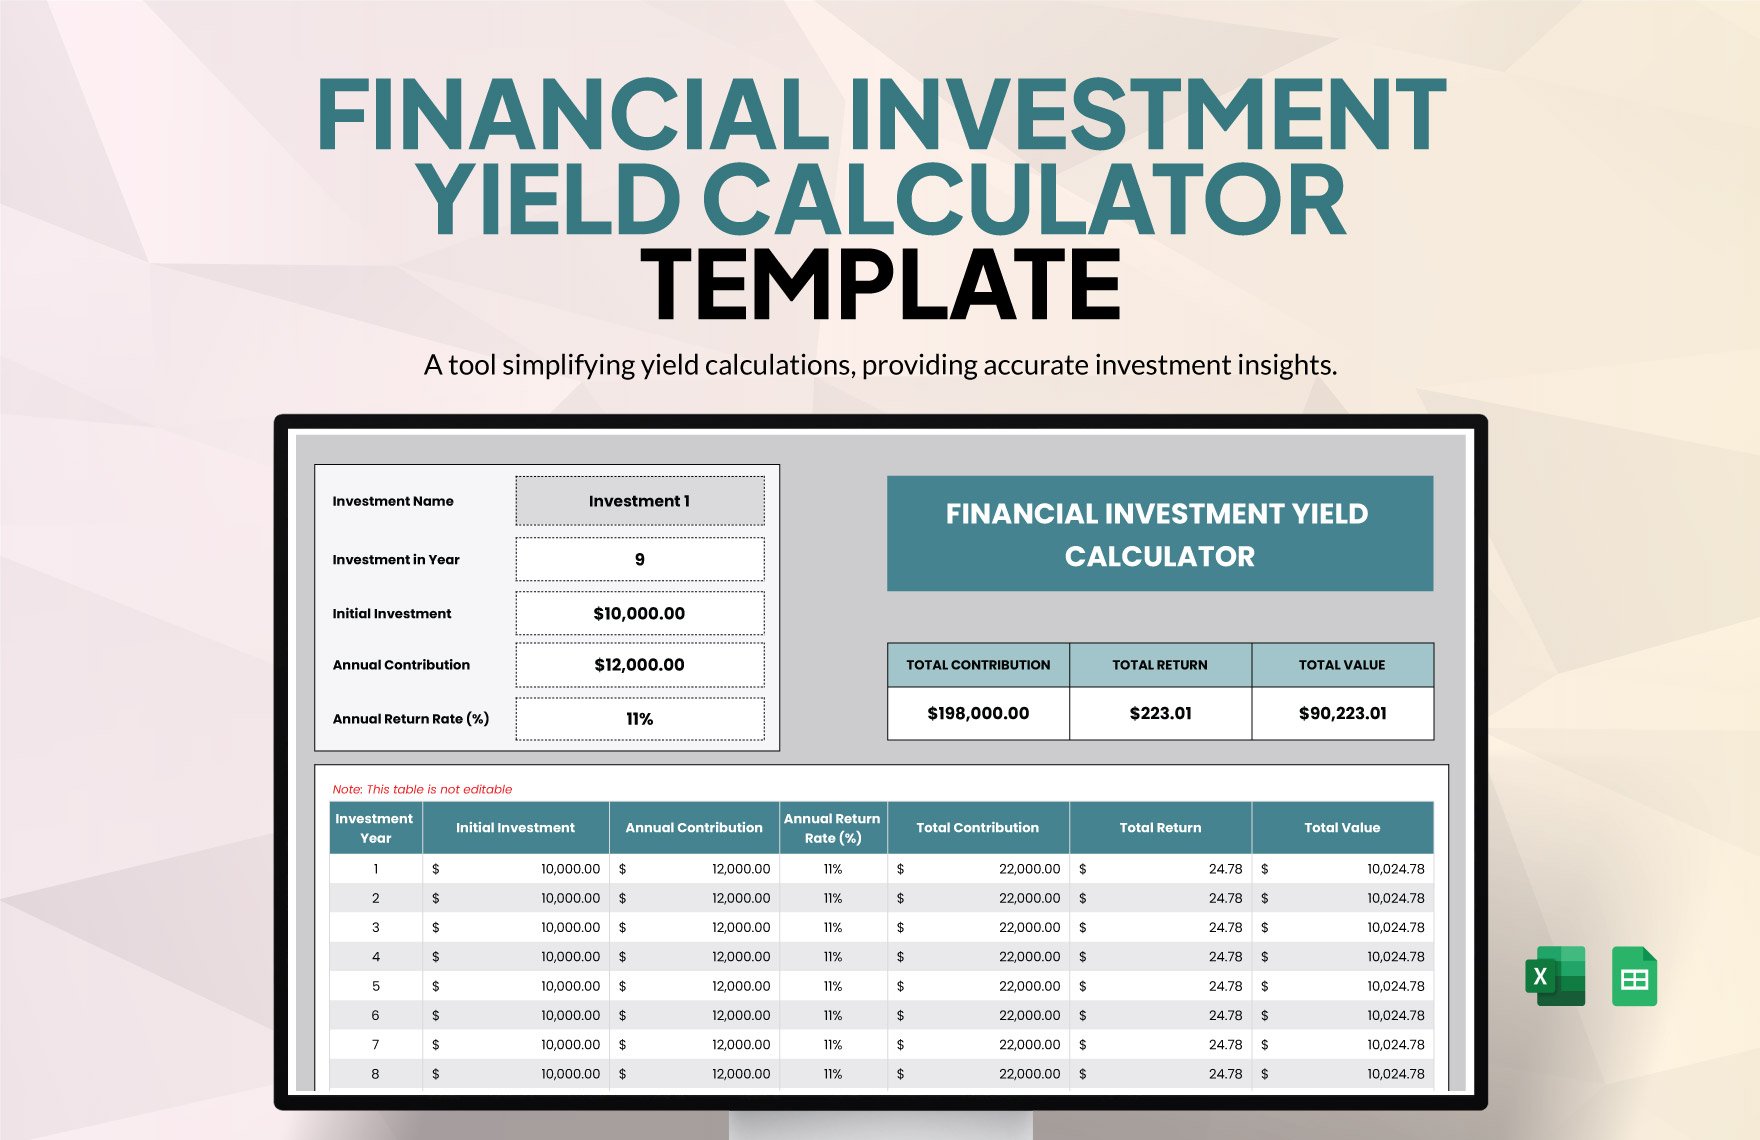 Financial Investment Yield Calculator Template in Excel, Google Sheets